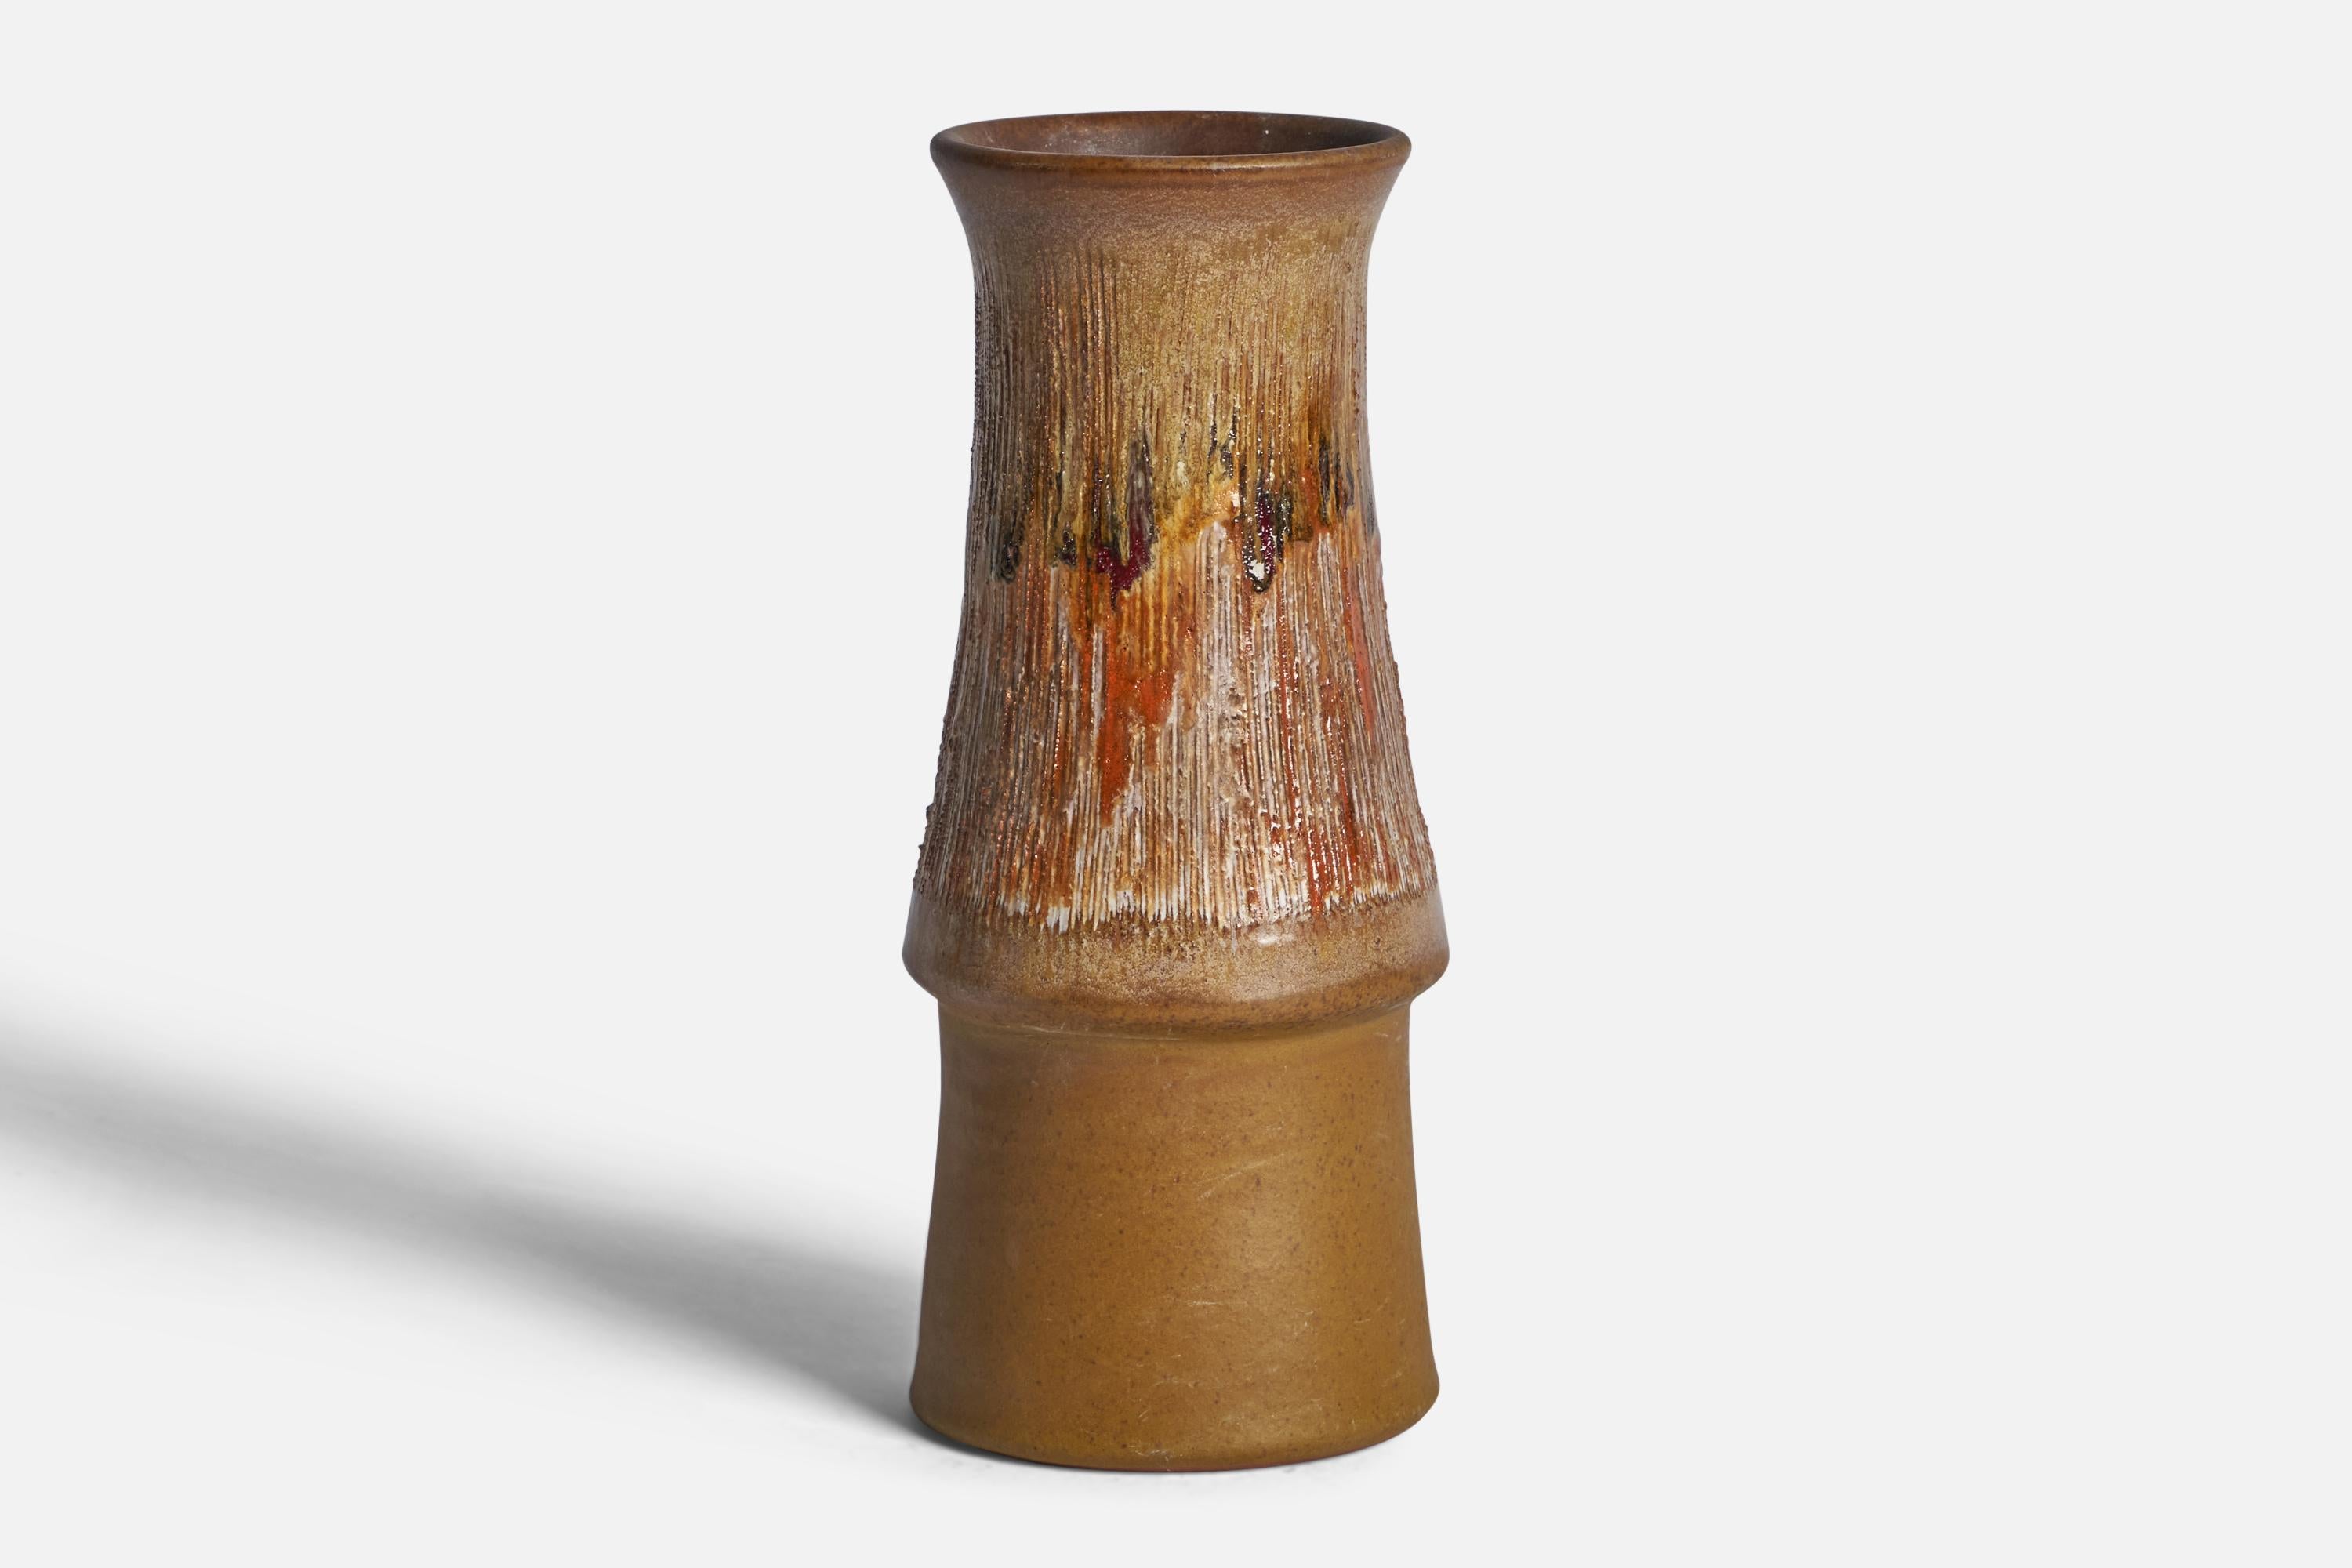 An incised yellow and orange-glazed stoneware vase designed and produced by Tilgmans Keramik, Sweden, c. 1950s.